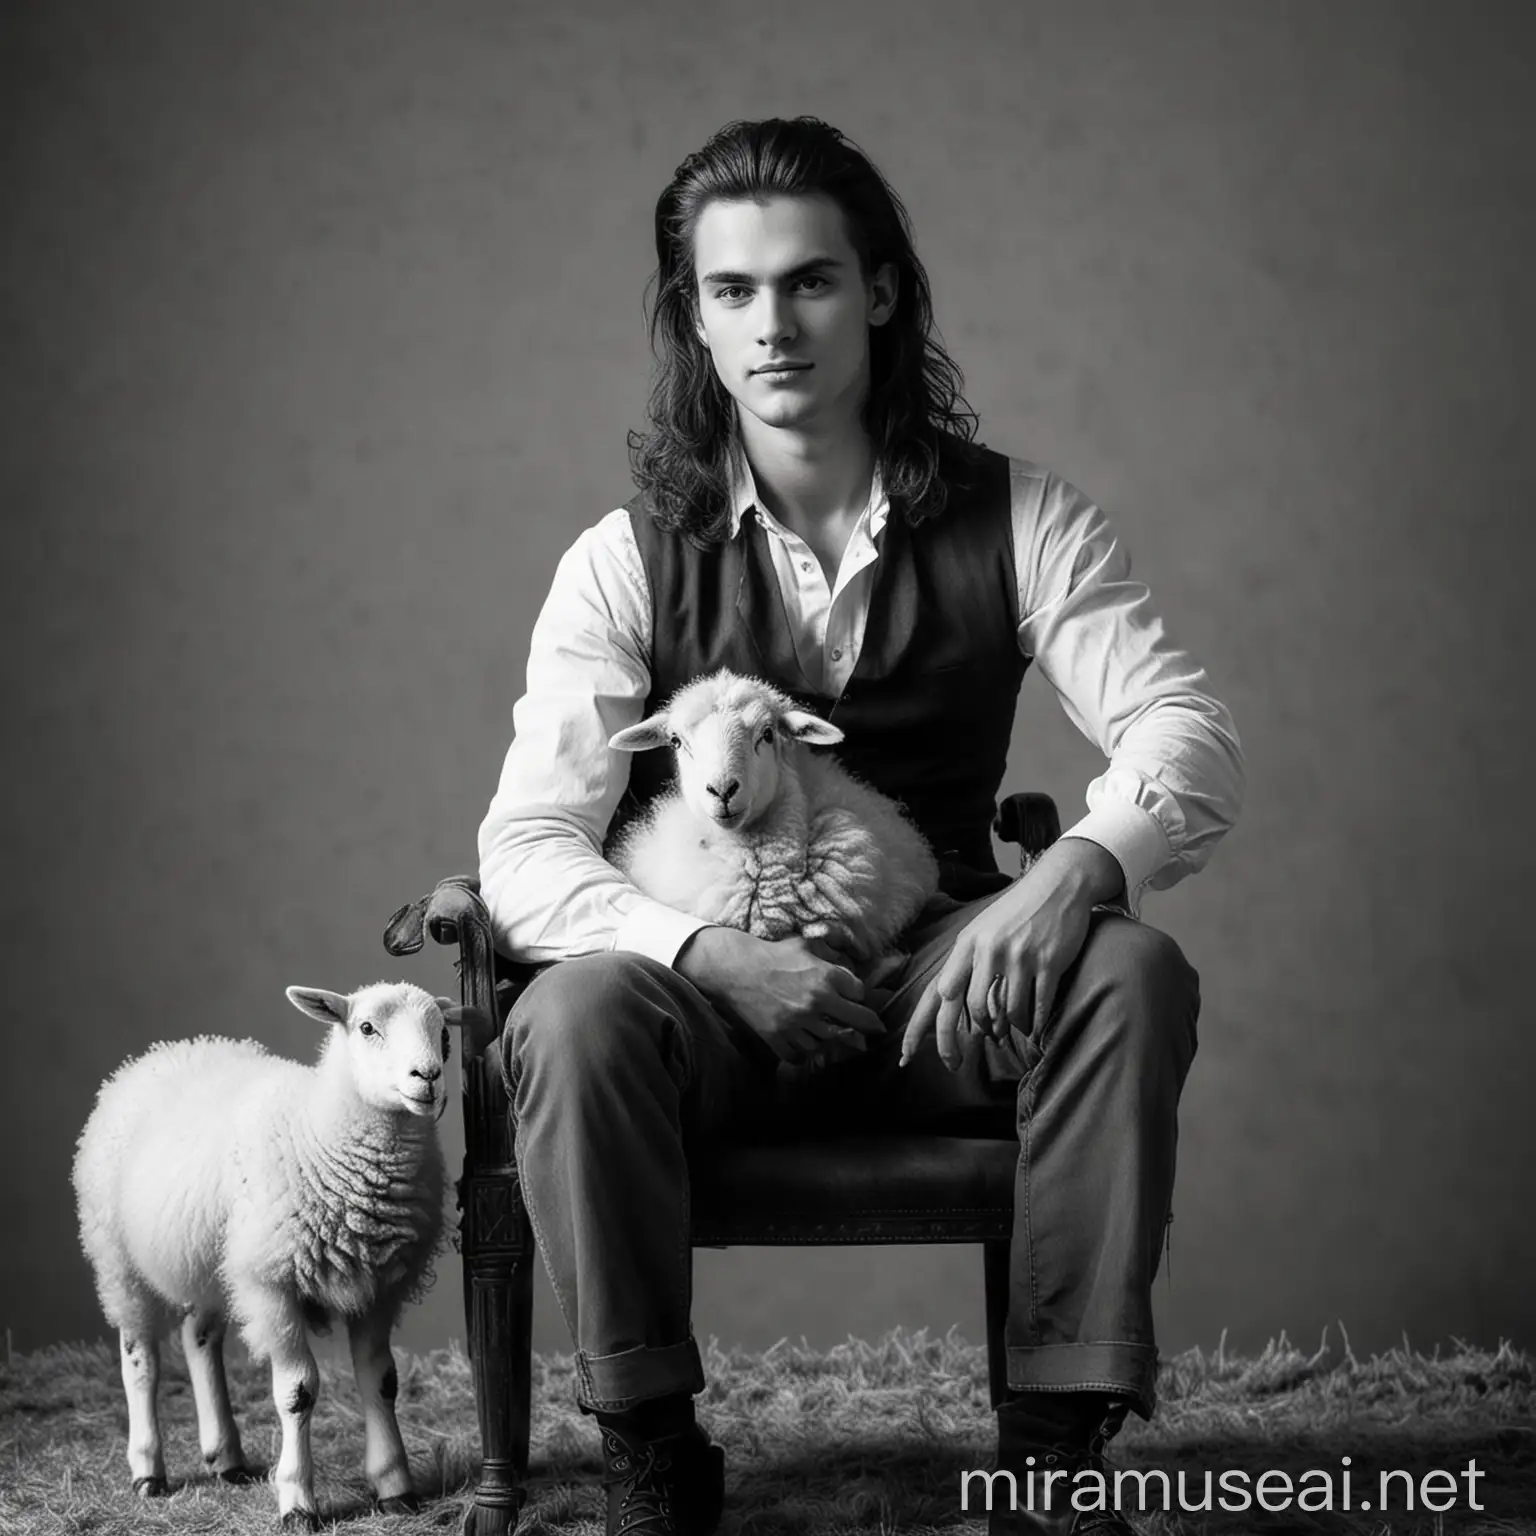 Stylish Young Man Sitting Surrounded by Sheep in Vintage Black and White Portrait